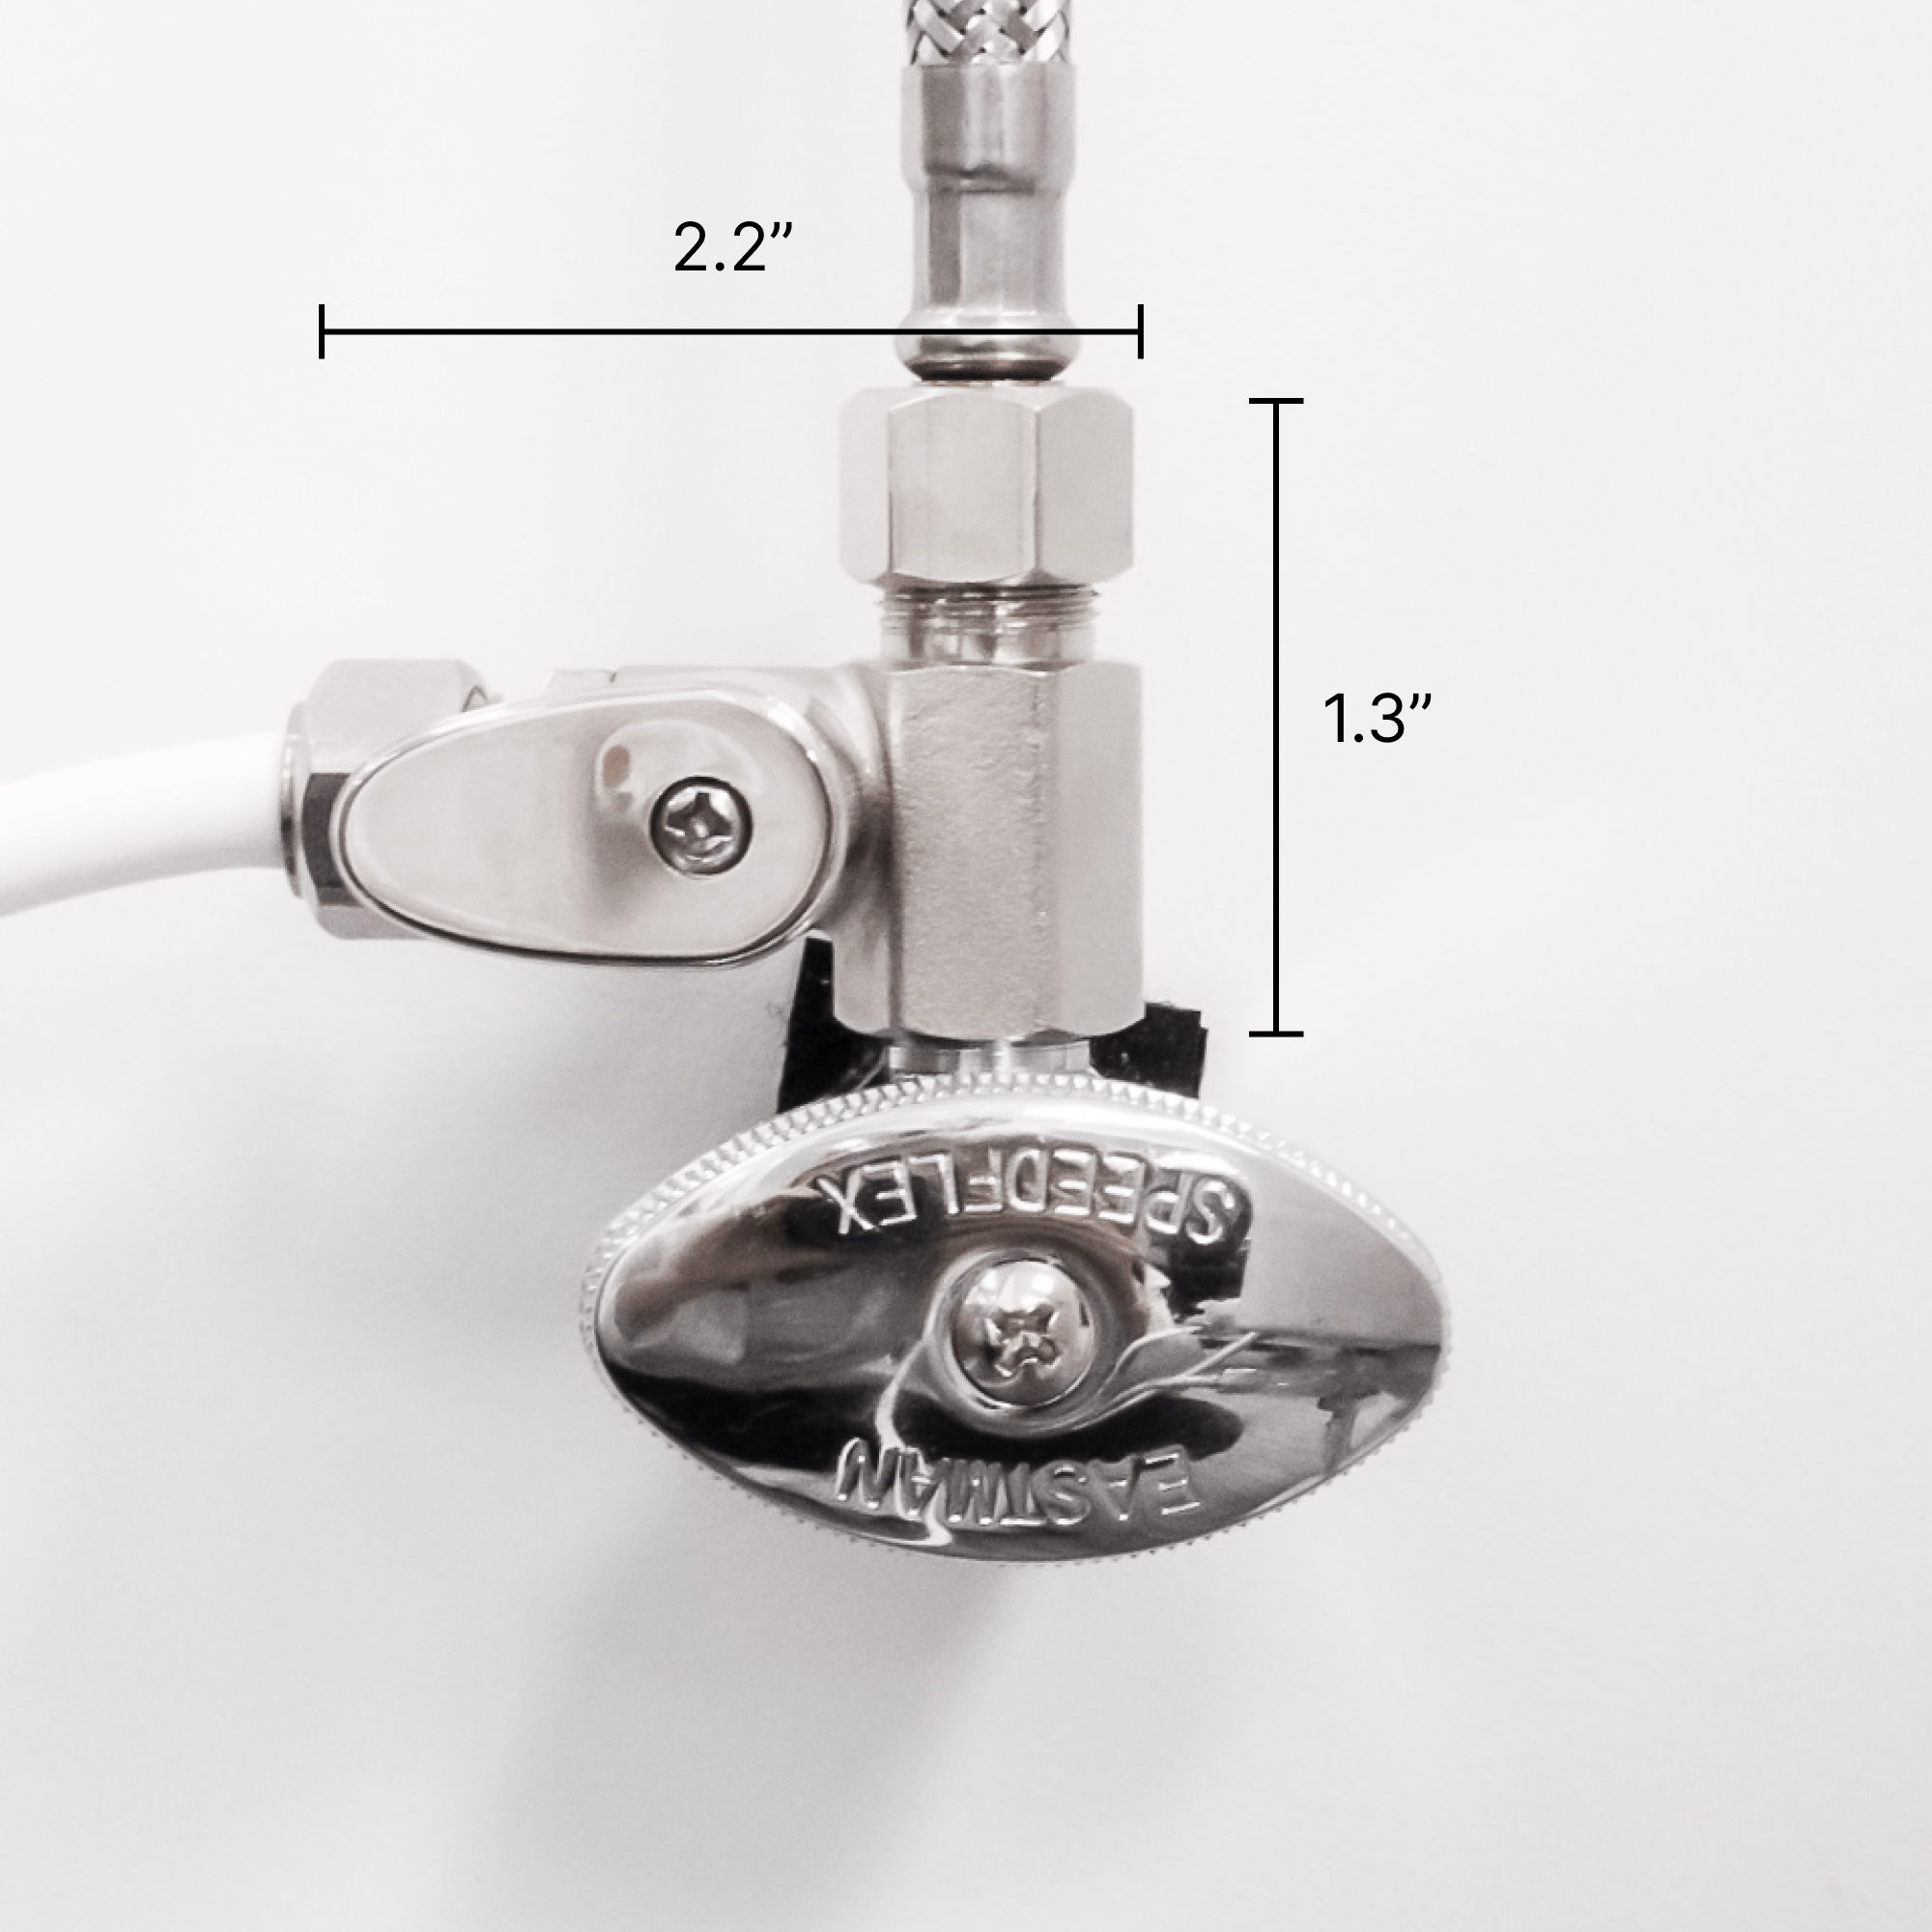 Hot Water Shut-Off T-Adapter in off position. Length: 2.2 inches, Height: 1.3 inches